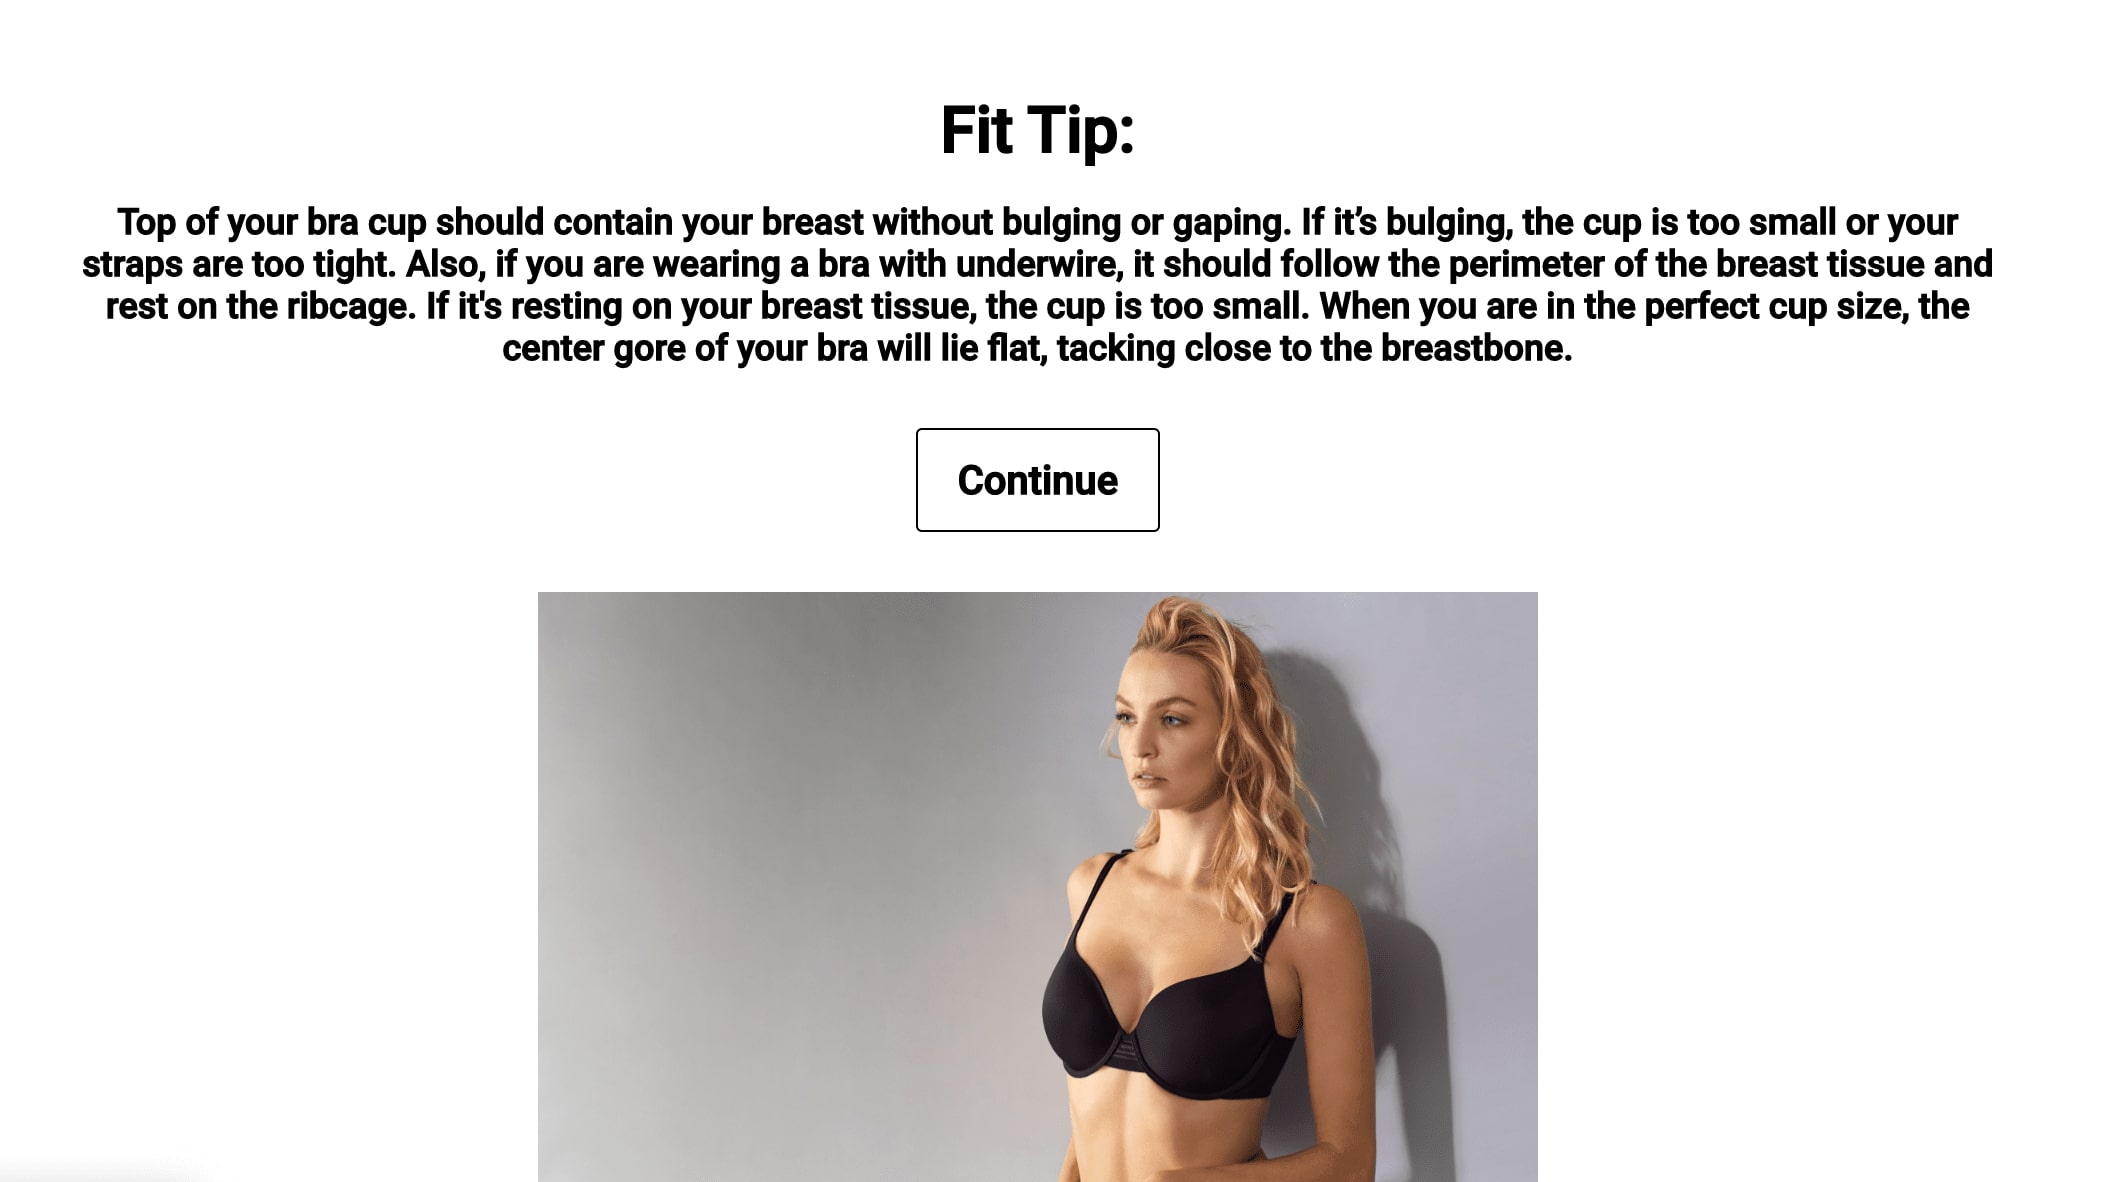 Apparel quiz - Le Mystere screenshot of their quiz providing a fitting tip